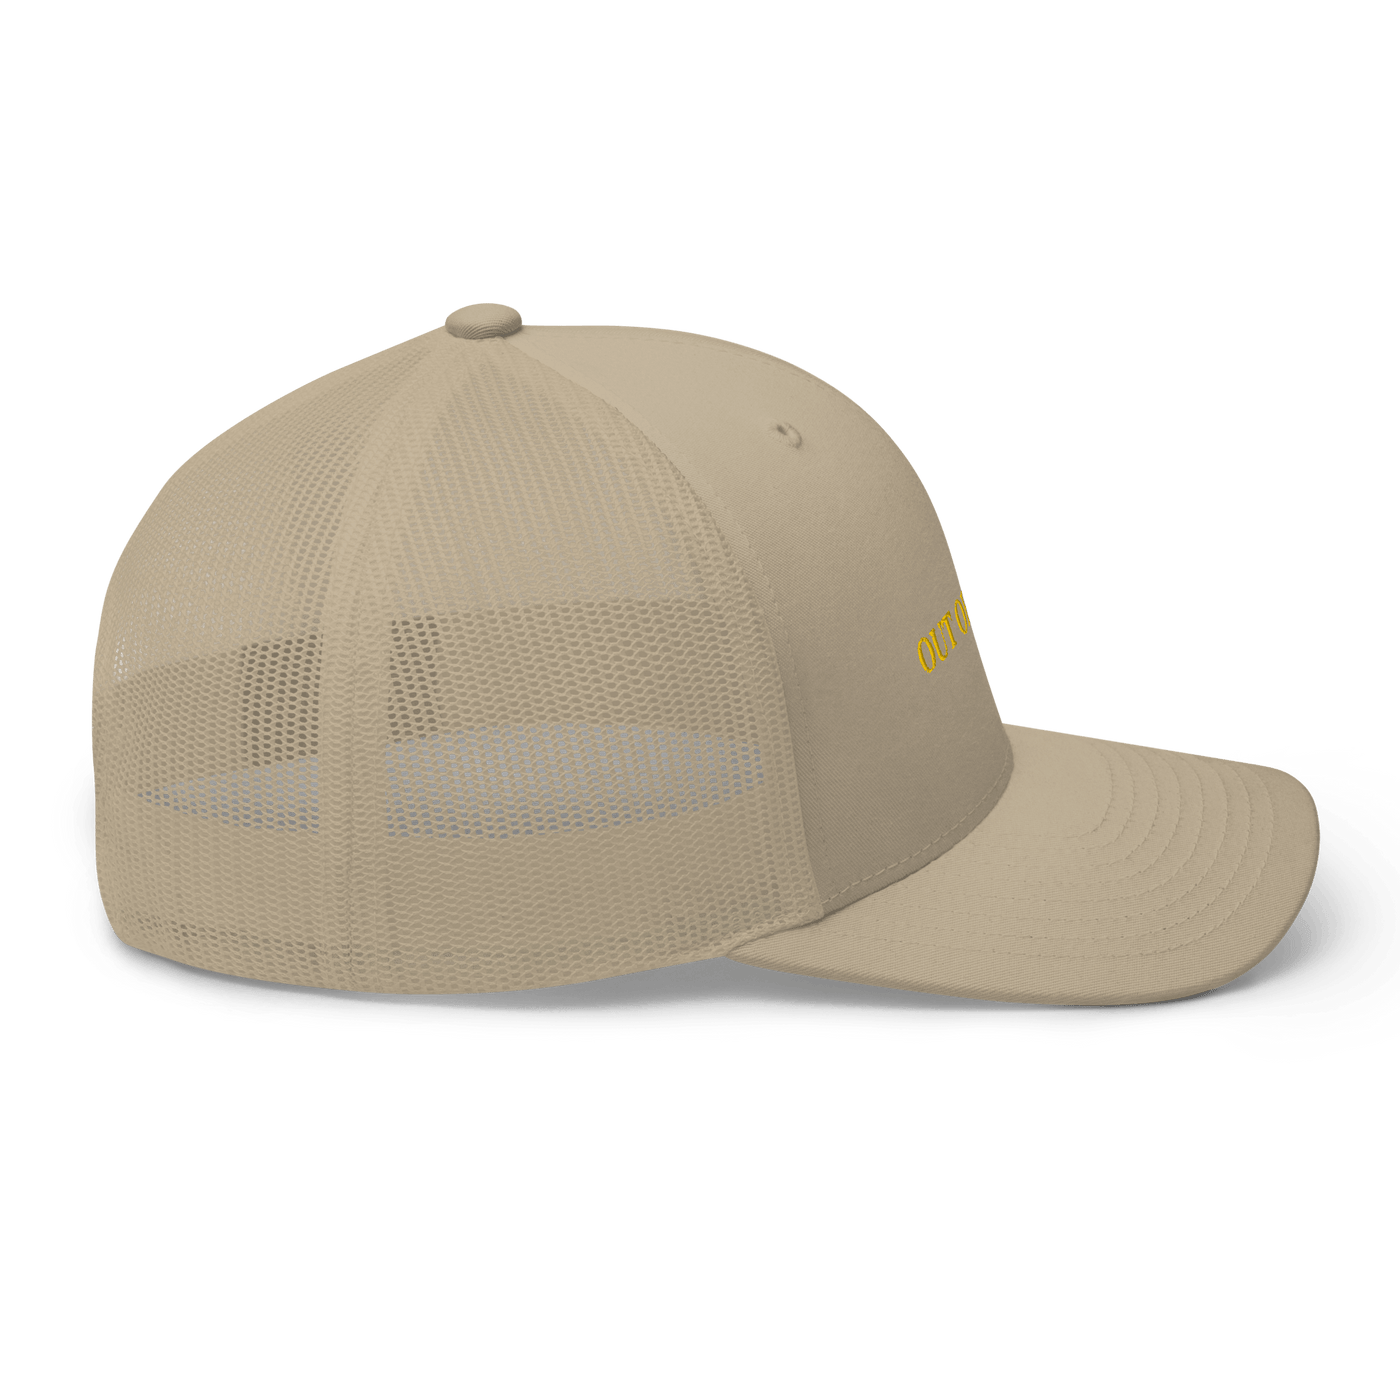 OUT OF OFFICE Trucker Cap - Khaki - - Just Another Cap Store